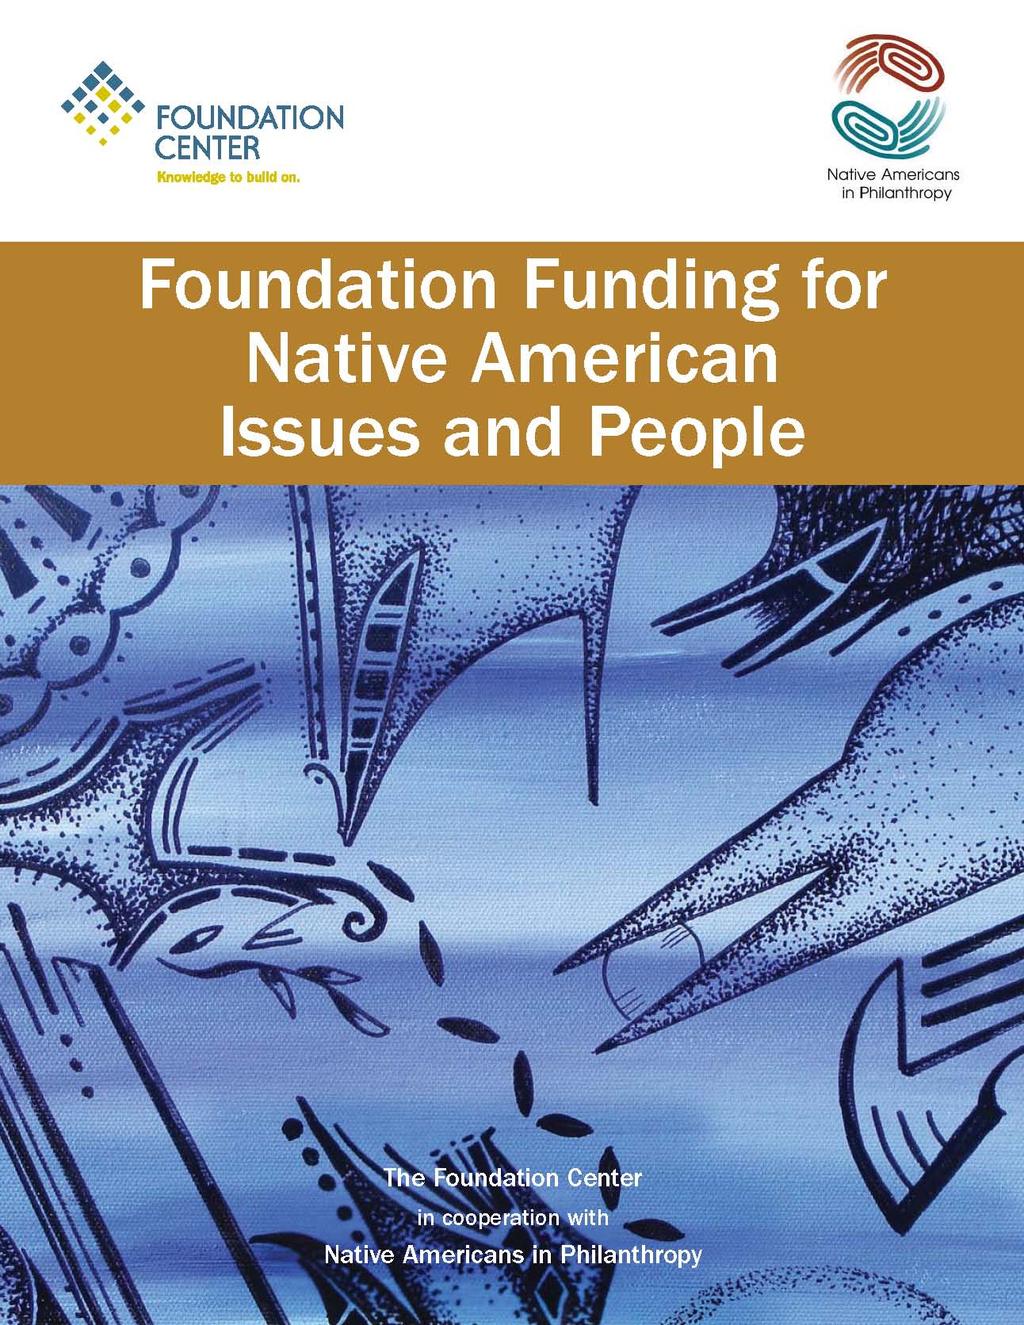 FoundaCon Funding For NaCve Americans Issues and Peoples Grant Sample Information All grants of $10,000 or over from more than 1,000 larger foundations